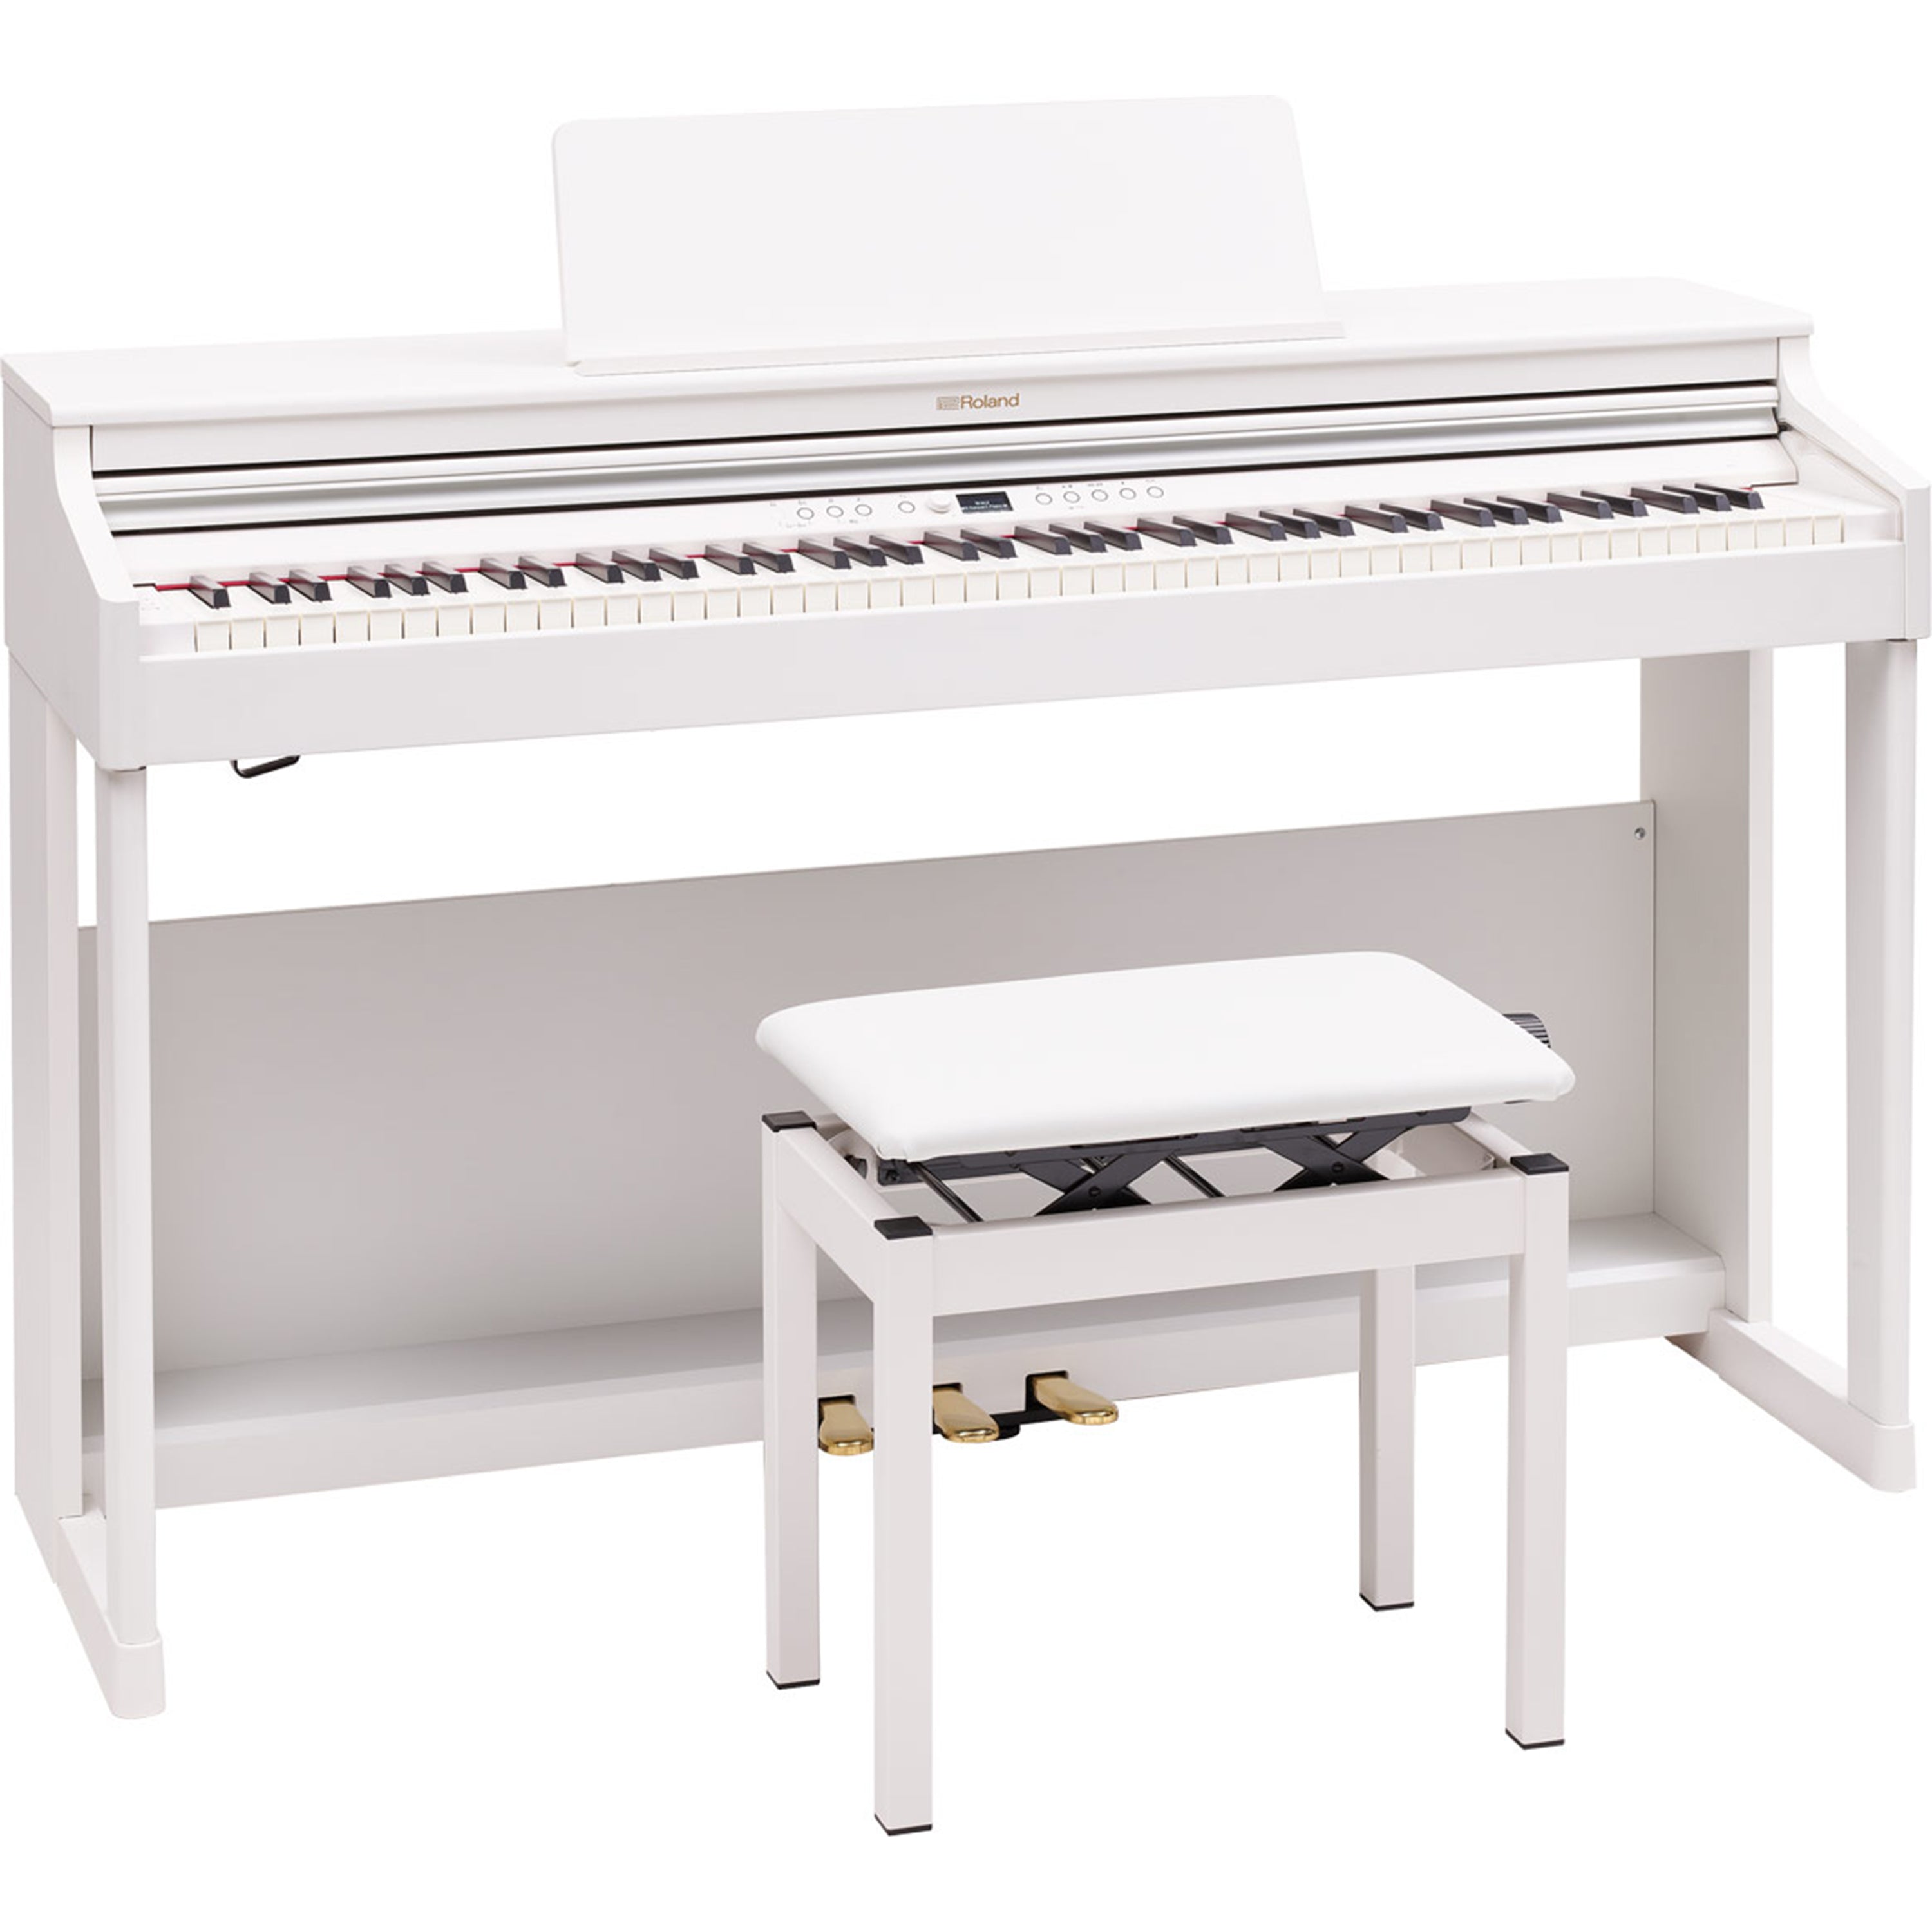 Roland RP701 Digital Piano - Satin White -  - with bench